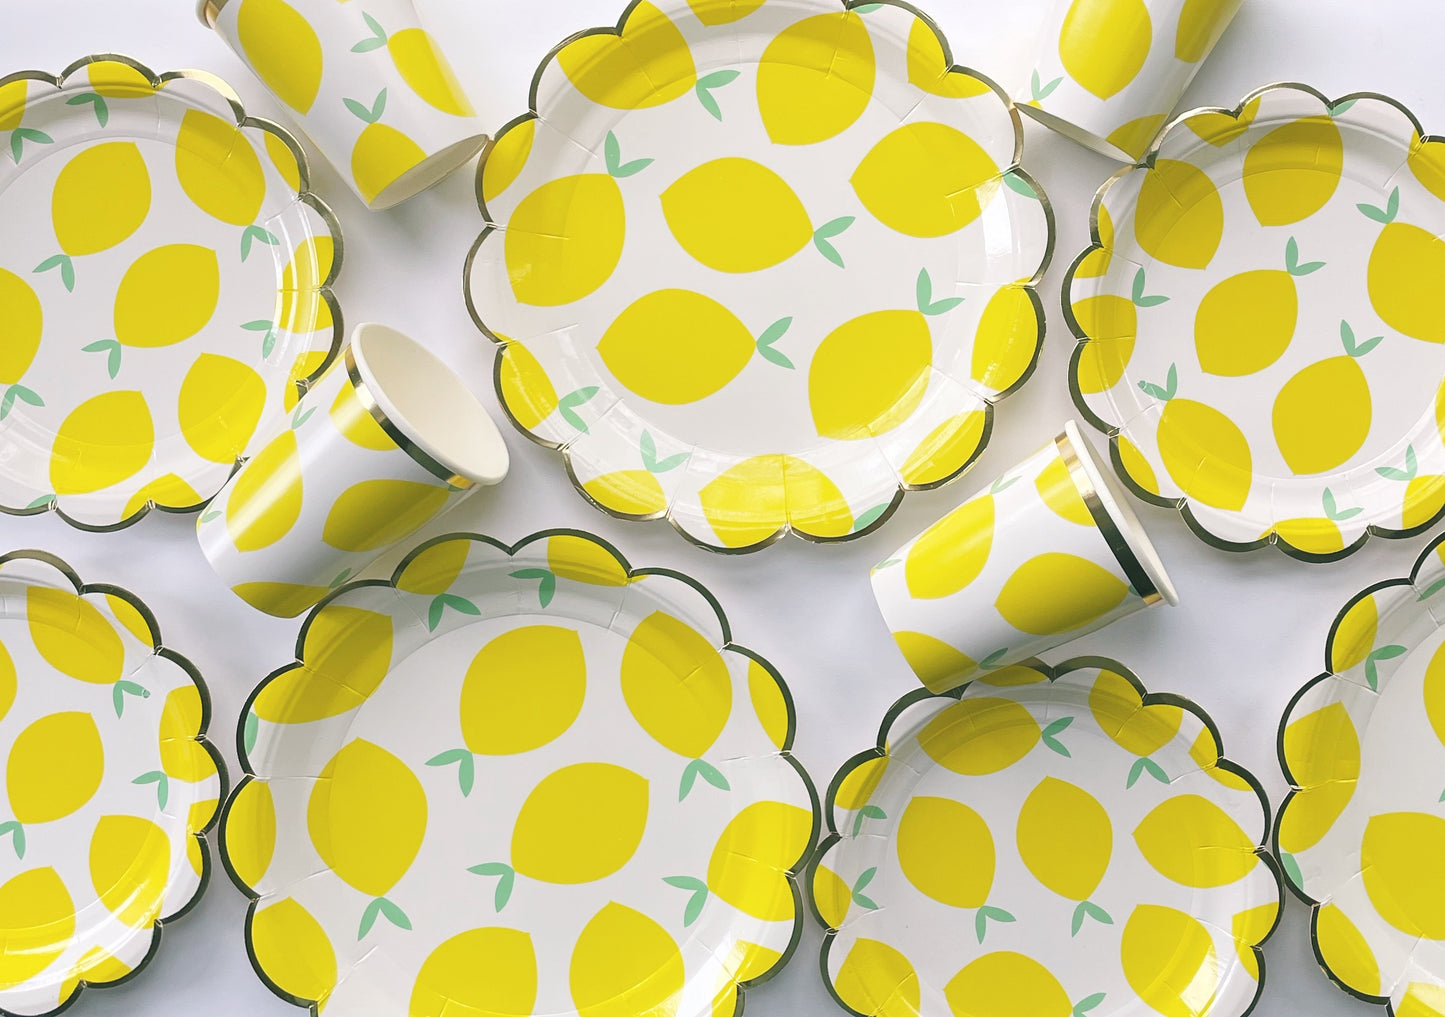 The Lemon Party Kit's paper party plates and cups. The lemon pattern includes yellow, green and white colours. The party plates have gold scalloped edges, and the party cups are trimmed with gold.